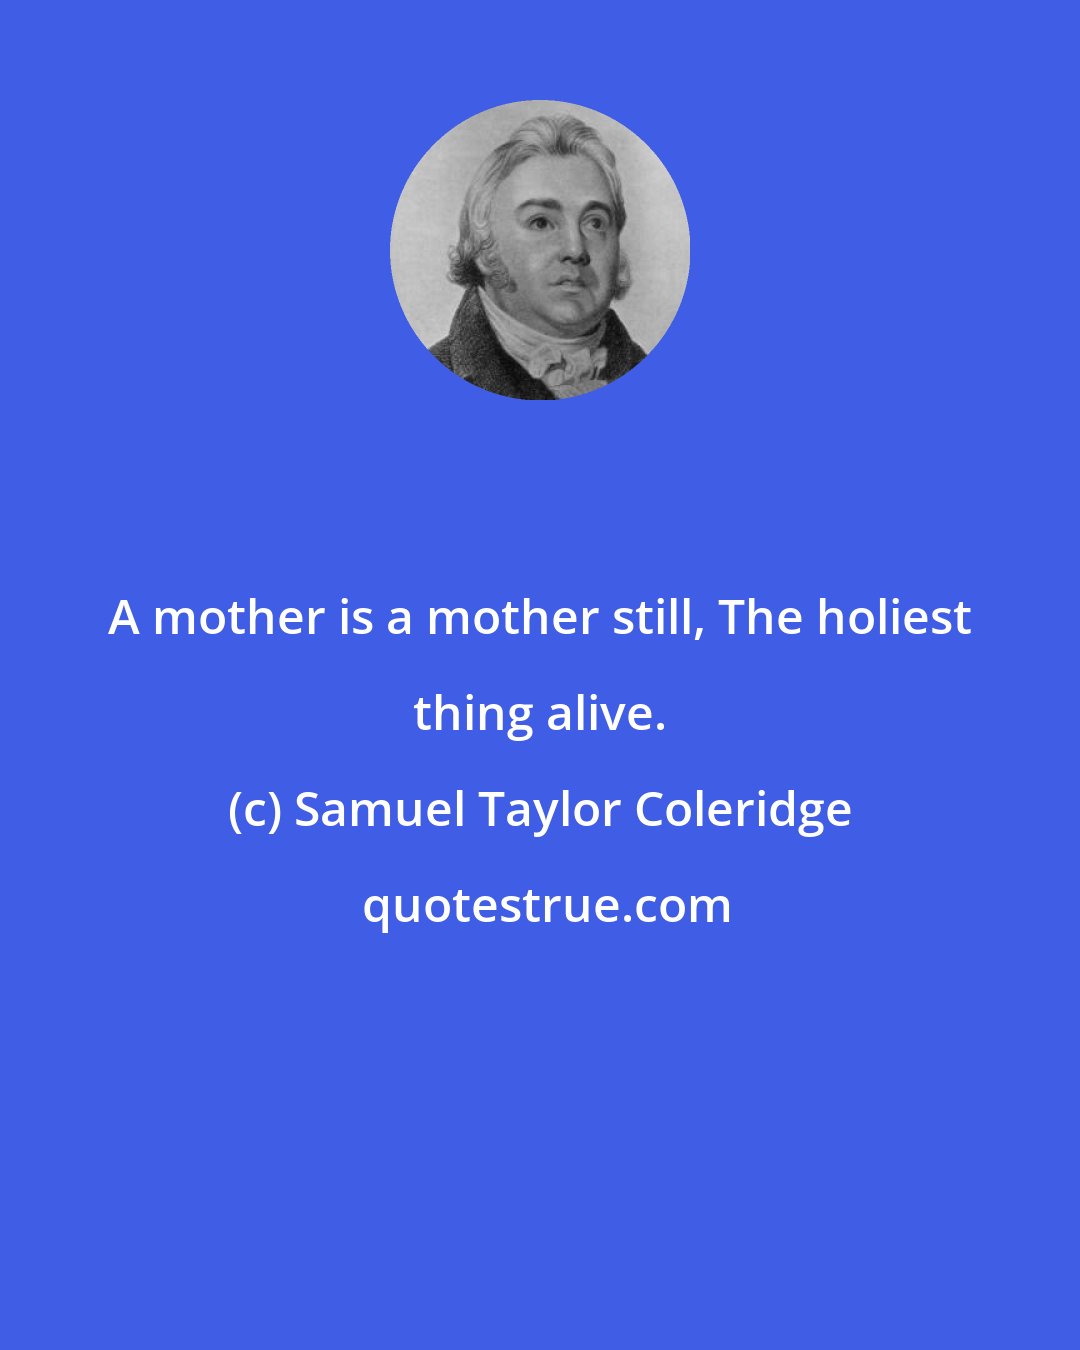 Samuel Taylor Coleridge: A mother is a mother still, The holiest thing alive.